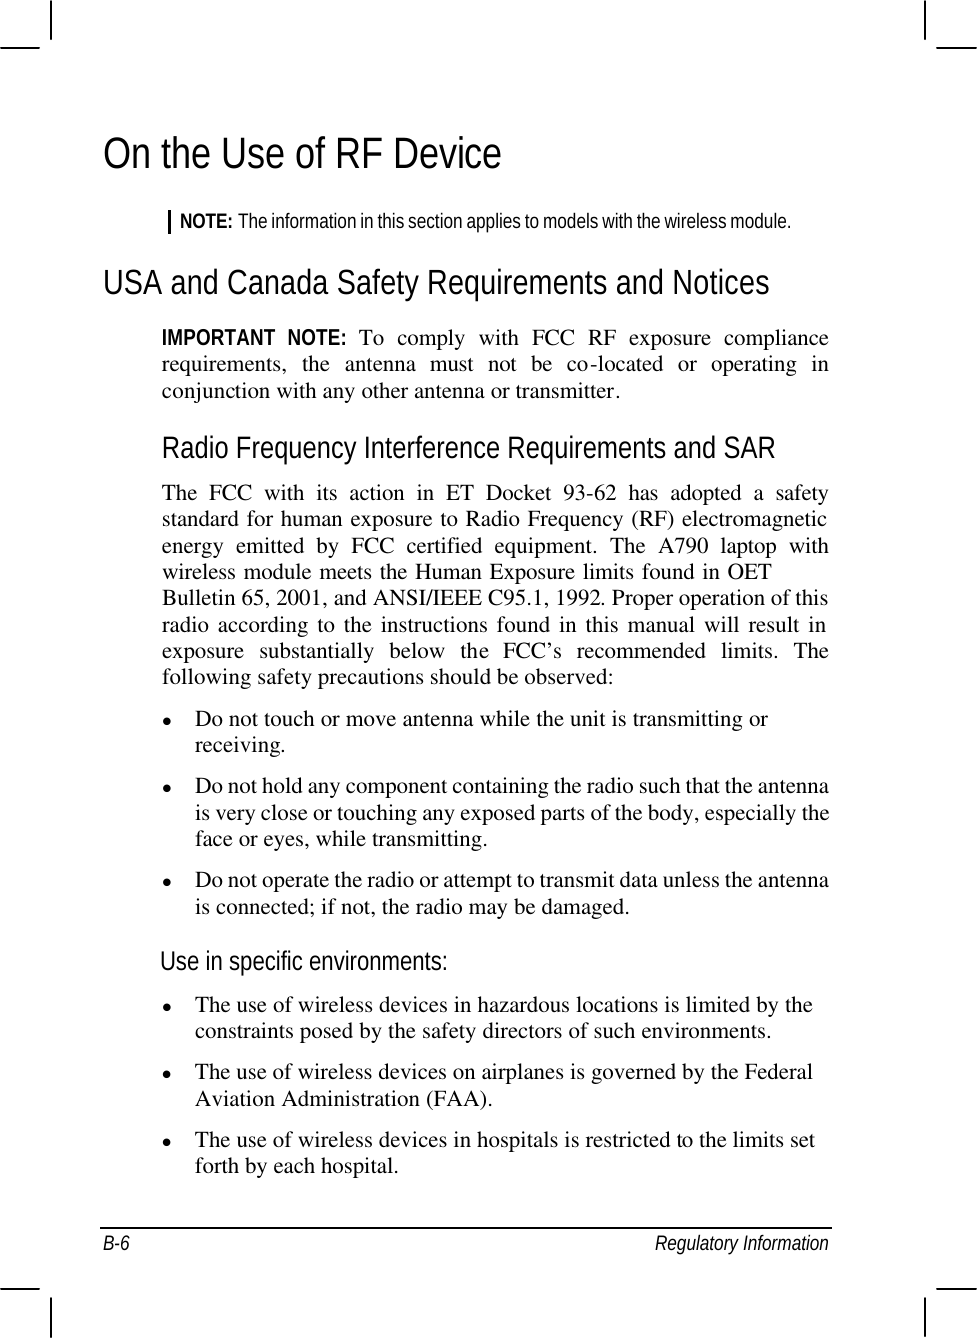  B-6 Regulatory Information On the Use of RF Device NOTE: The information in this section applies to models with the wireless module. USA and Canada Safety Requirements and Notices IMPORTANT NOTE: To comply with FCC RF exposure compliance requirements, the antenna must not be co-located or operating in conjunction with any other antenna or transmitter. Radio Frequency Interference Requirements and SAR The FCC with its action in ET Docket 93-62 has adopted a safety standard for human exposure to Radio Frequency (RF) electromagnetic energy emitted by FCC certified equipment. The  A790 laptop with wireless module meets the Human Exposure limits found in OET Bulletin 65, 2001, and ANSI/IEEE C95.1, 1992. Proper operation of this radio according to the instructions found in this manual will result in exposure substantially below the FCC’s recommended limits. The following safety precautions should be observed: l Do not touch or move antenna while the unit is transmitting or receiving. l Do not hold any component containing the radio such that the antenna is very close or touching any exposed parts of the body, especially the face or eyes, while transmitting. l Do not operate the radio or attempt to transmit data unless the antenna is connected; if not, the radio may be damaged. Use in specific environments: l The use of wireless devices in hazardous locations is limited by the constraints posed by the safety directors of such environments. l The use of wireless devices on airplanes is governed by the Federal Aviation Administration (FAA). l The use of wireless devices in hospitals is restricted to the limits set forth by each hospital. 